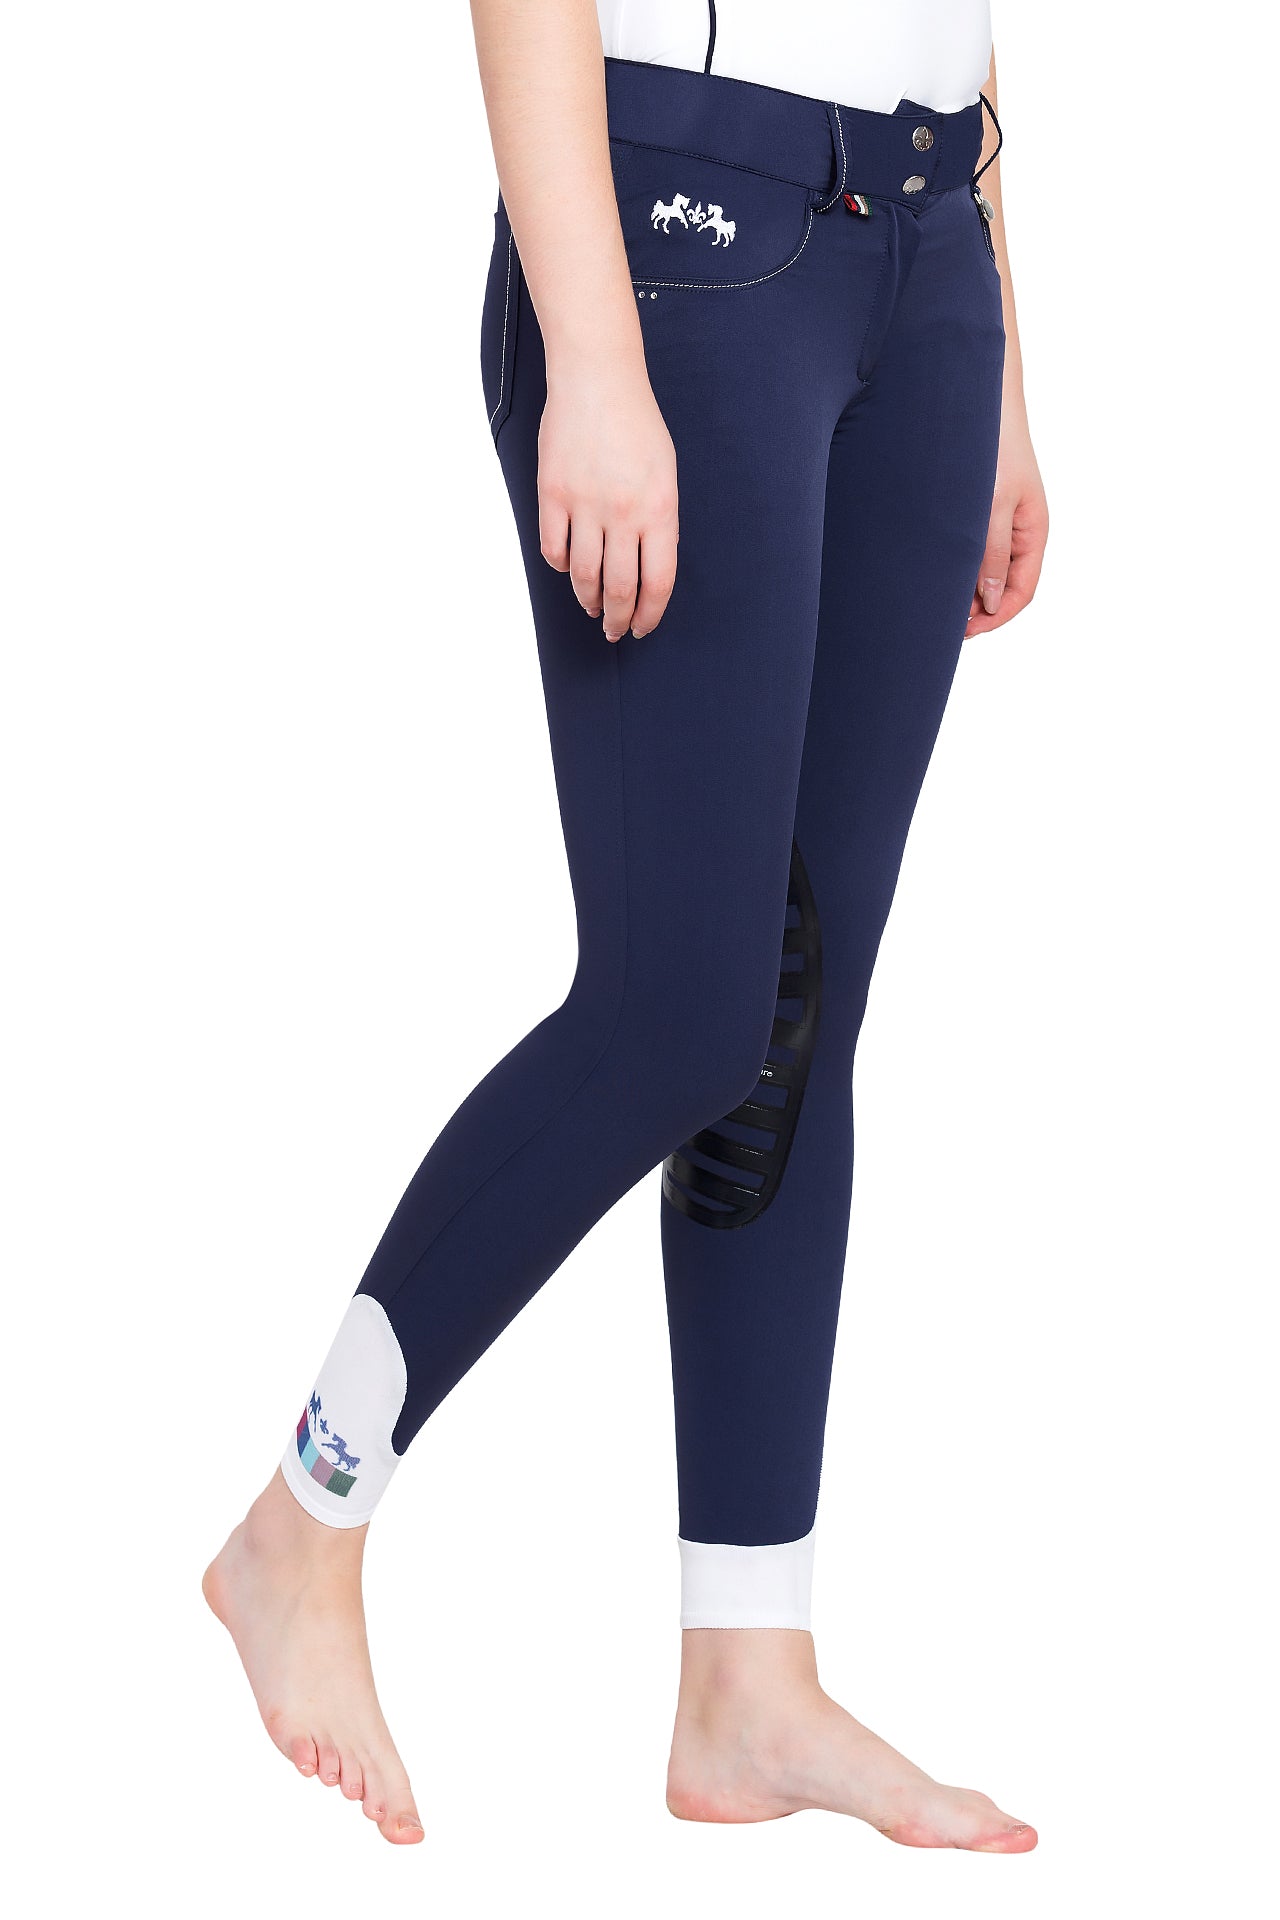 Equine Couture Ladies Darsy Silicone Knee Patch Breeches - Breeches.com